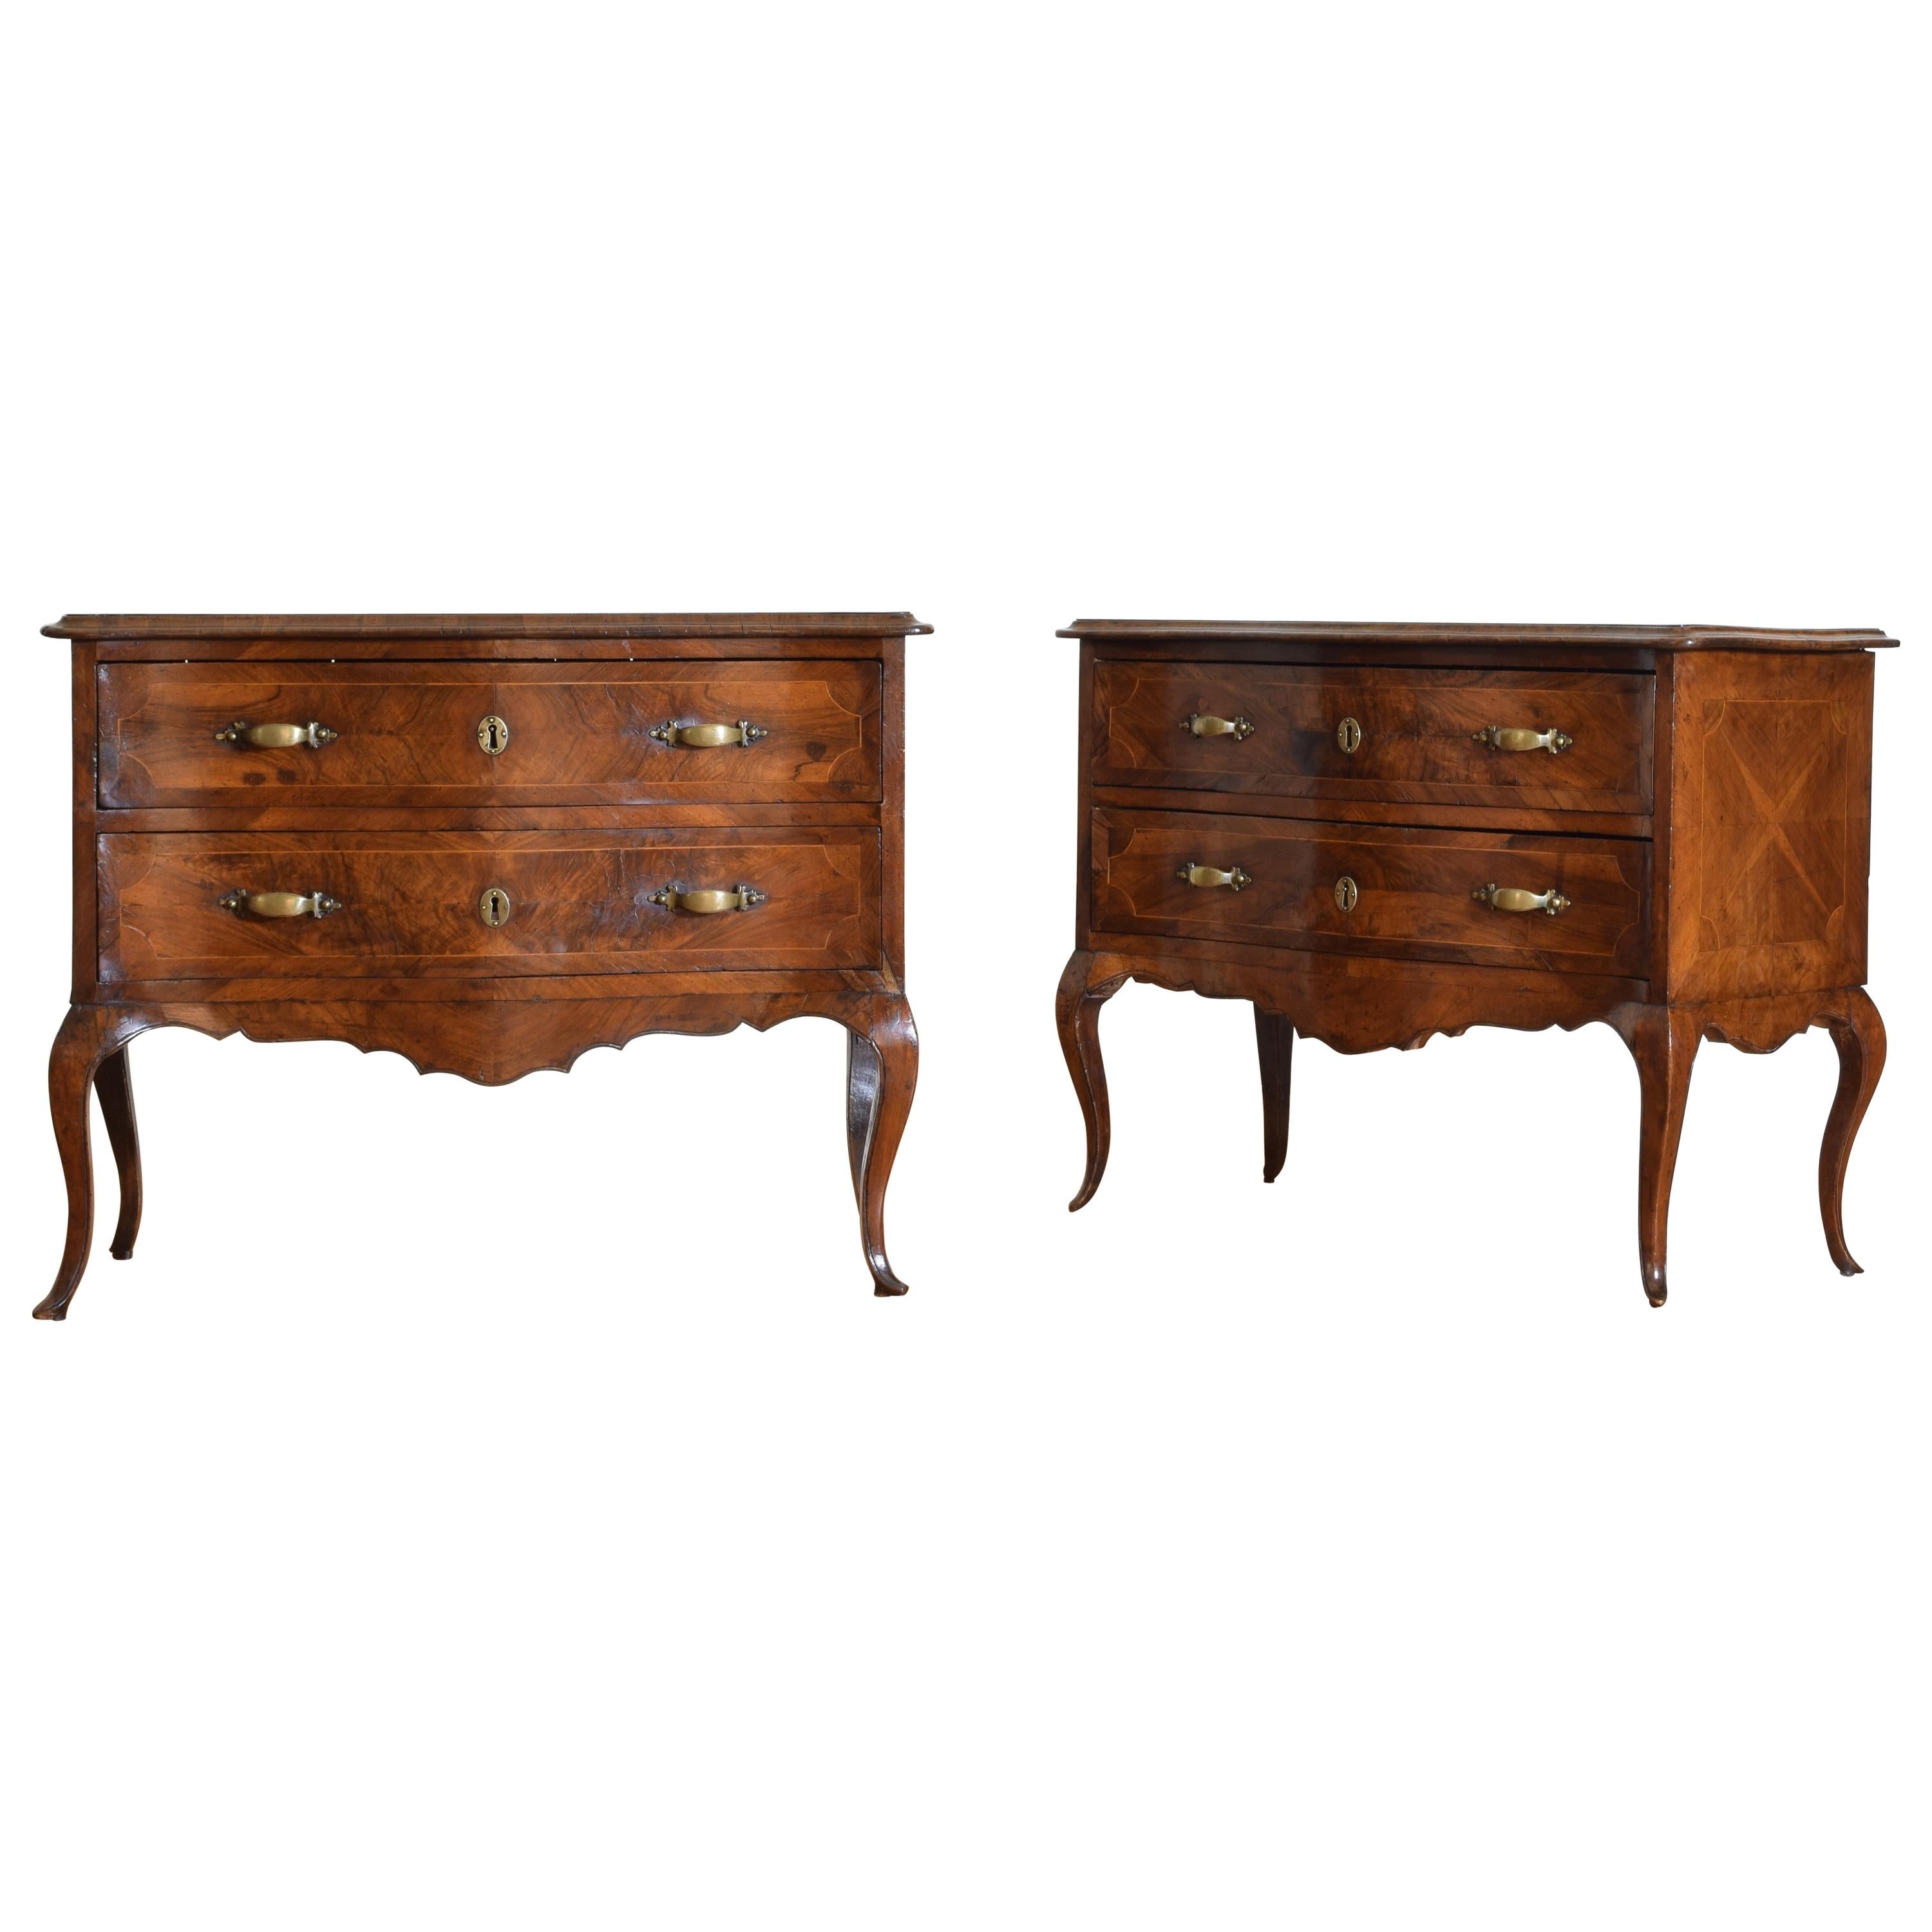 Pair of Italian Rococo Walnut and Olivewood 2-Drawer Commodes, Mid-18th Century